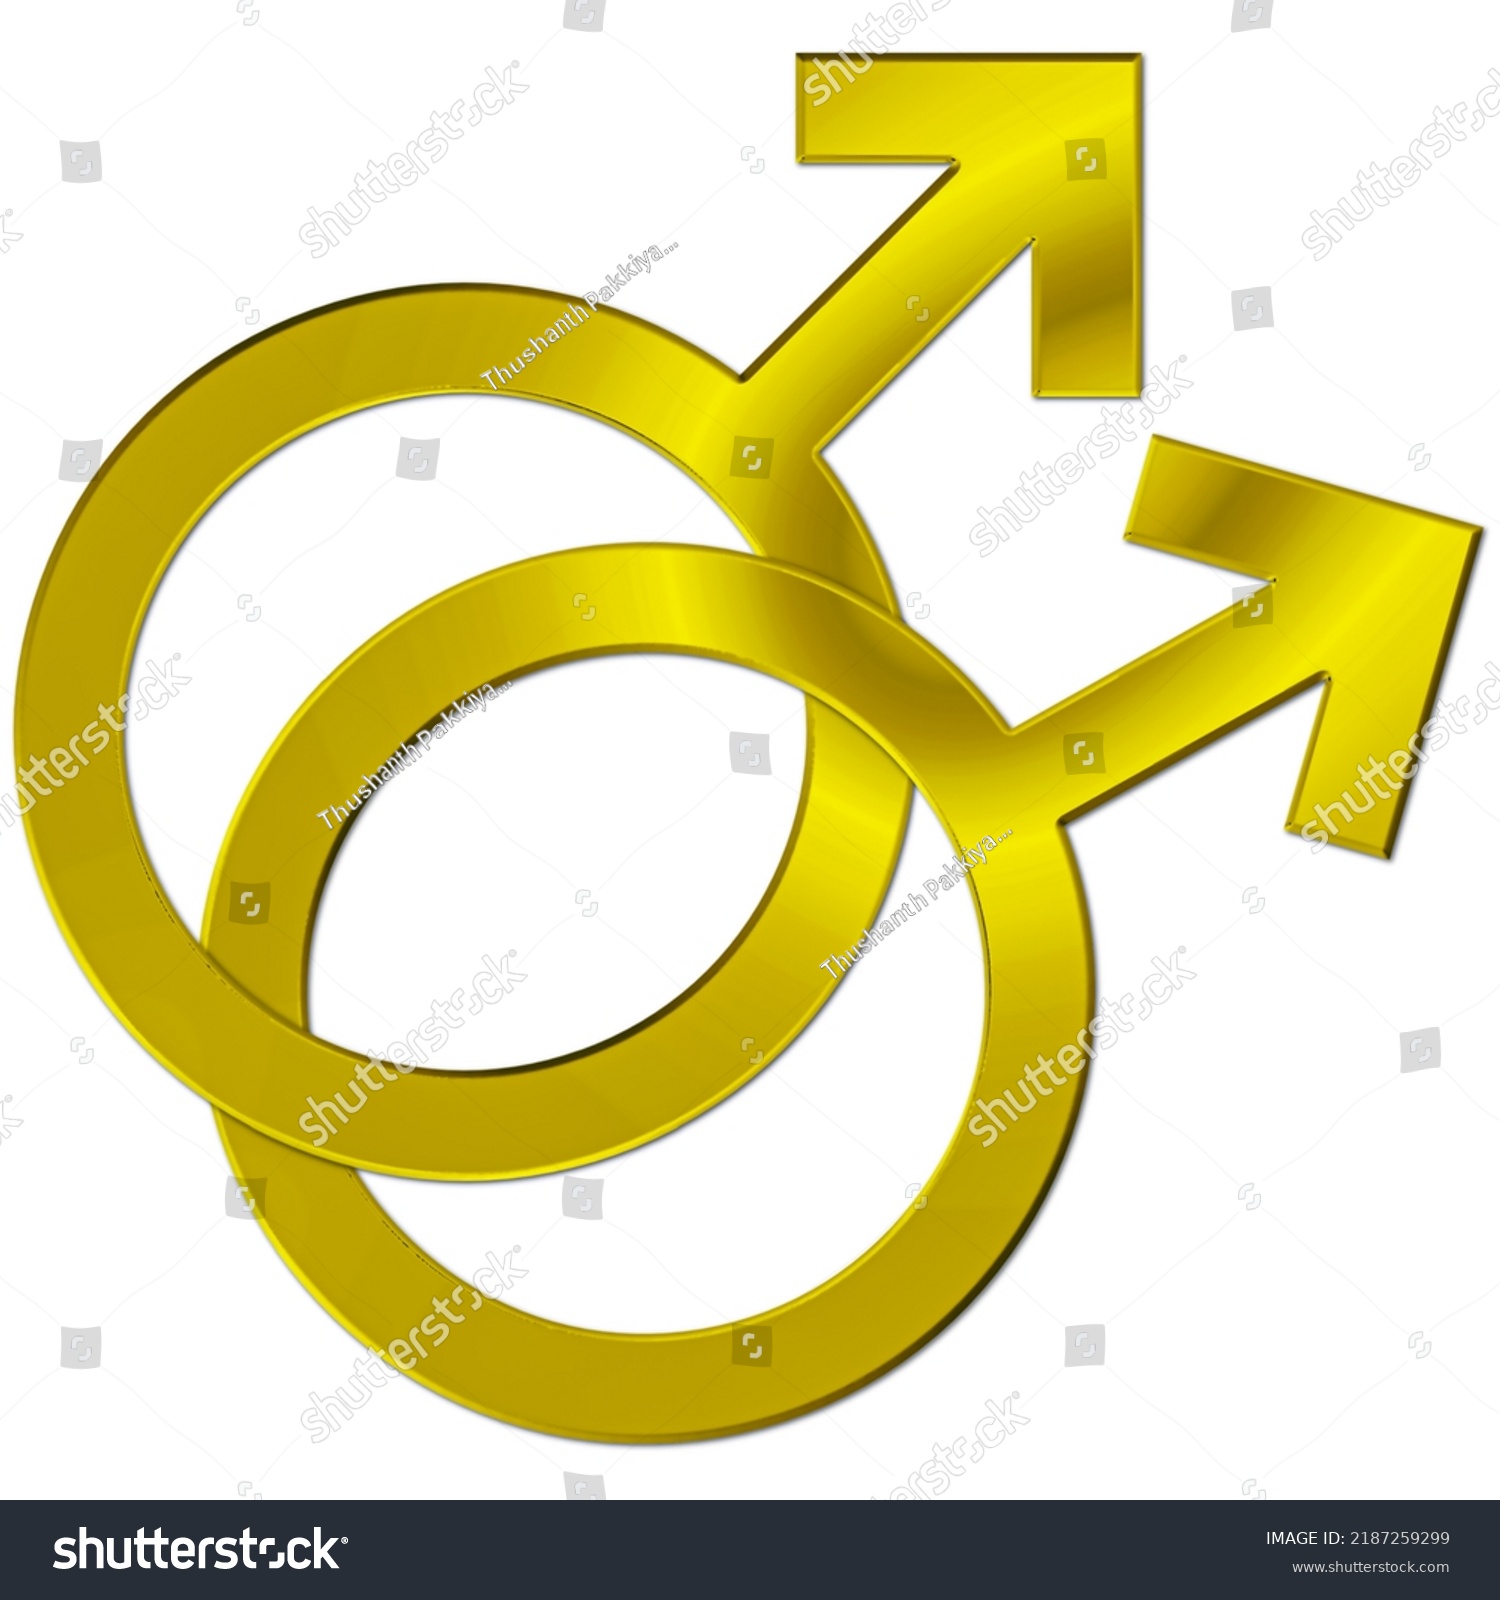 Two Male Symbols Crossed Representing Gay Stock Illustration 2187259299